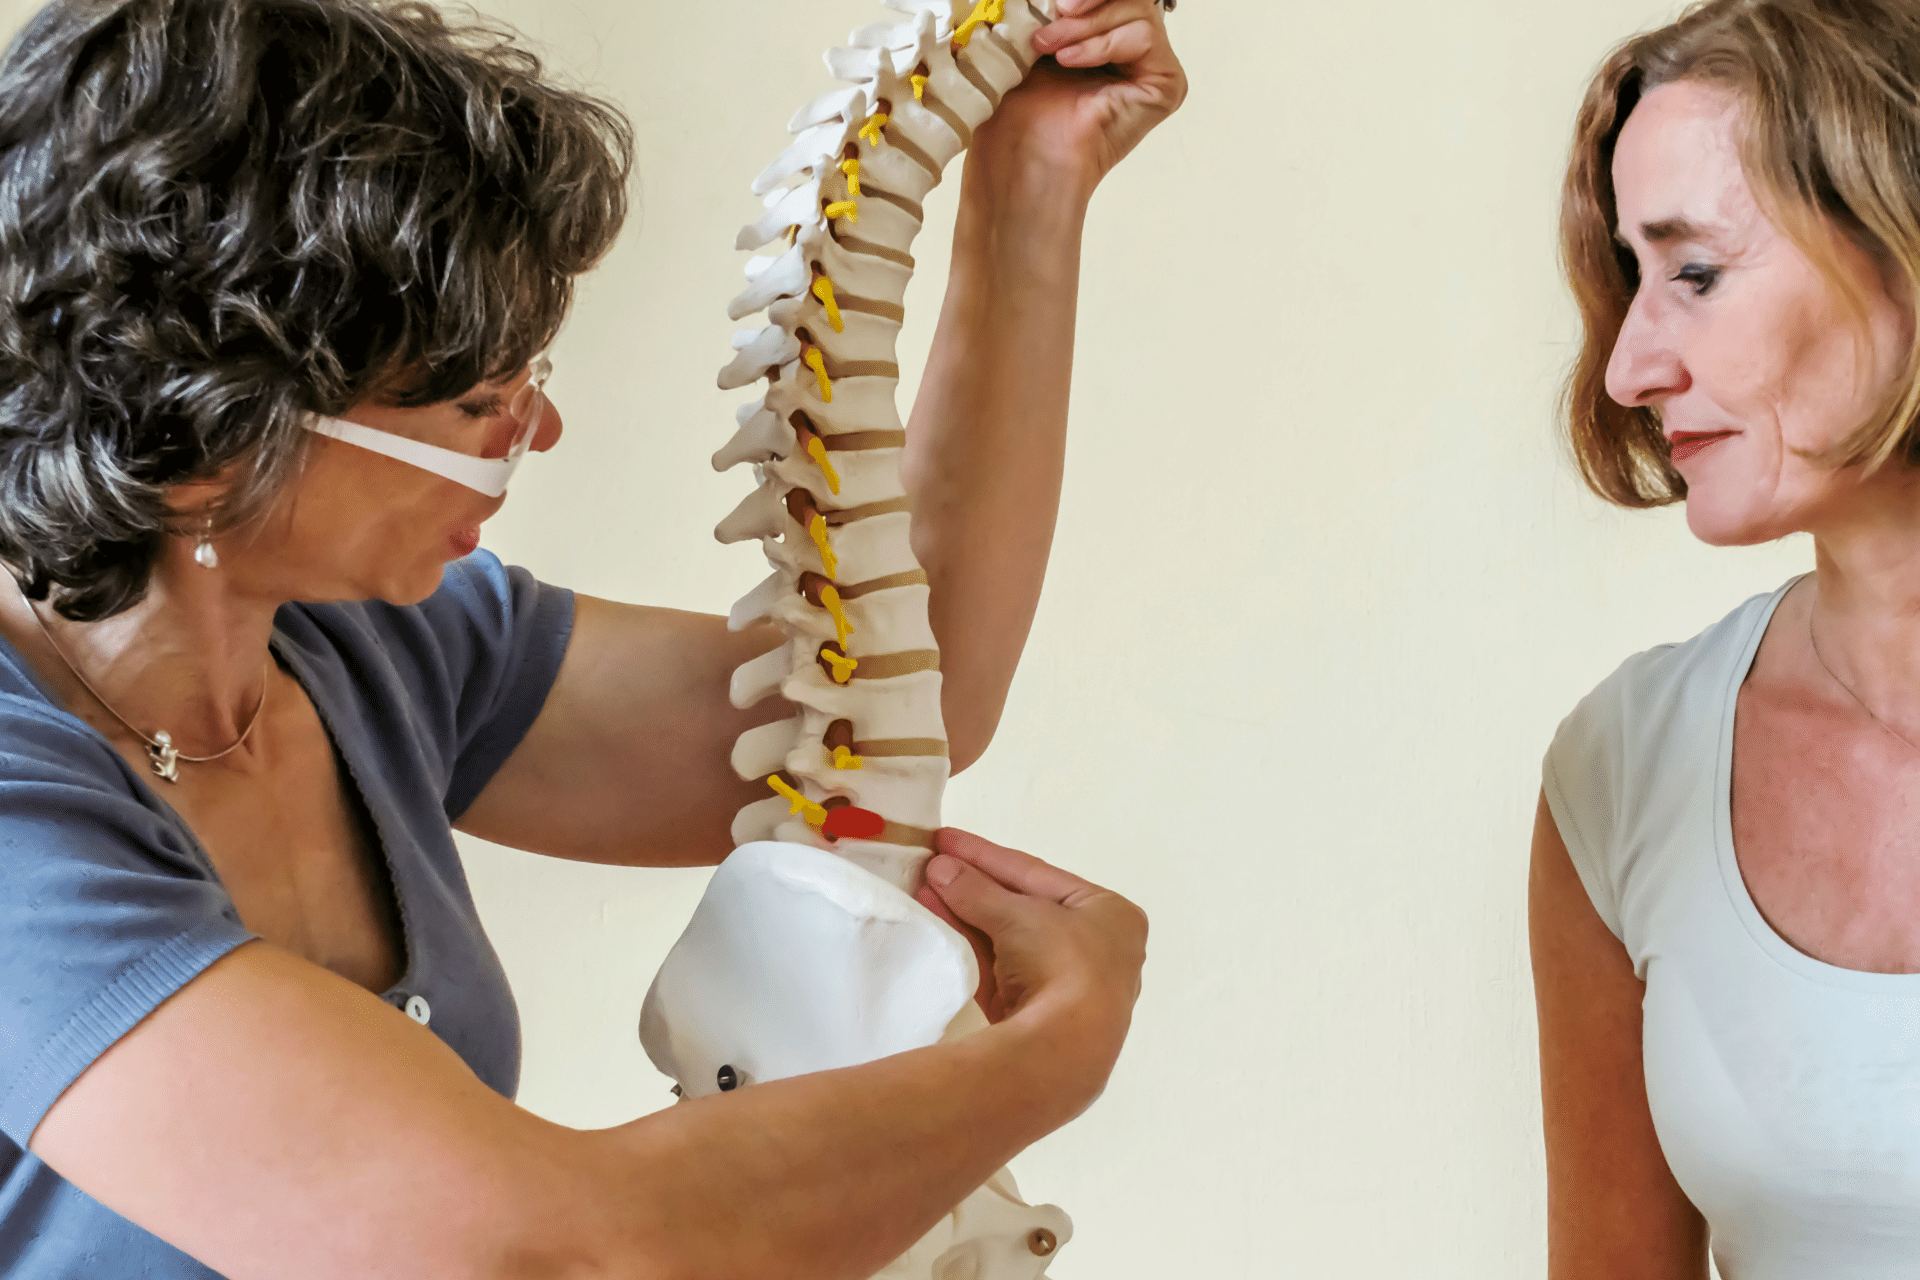 Different Types of Spinal Adjustment Explained